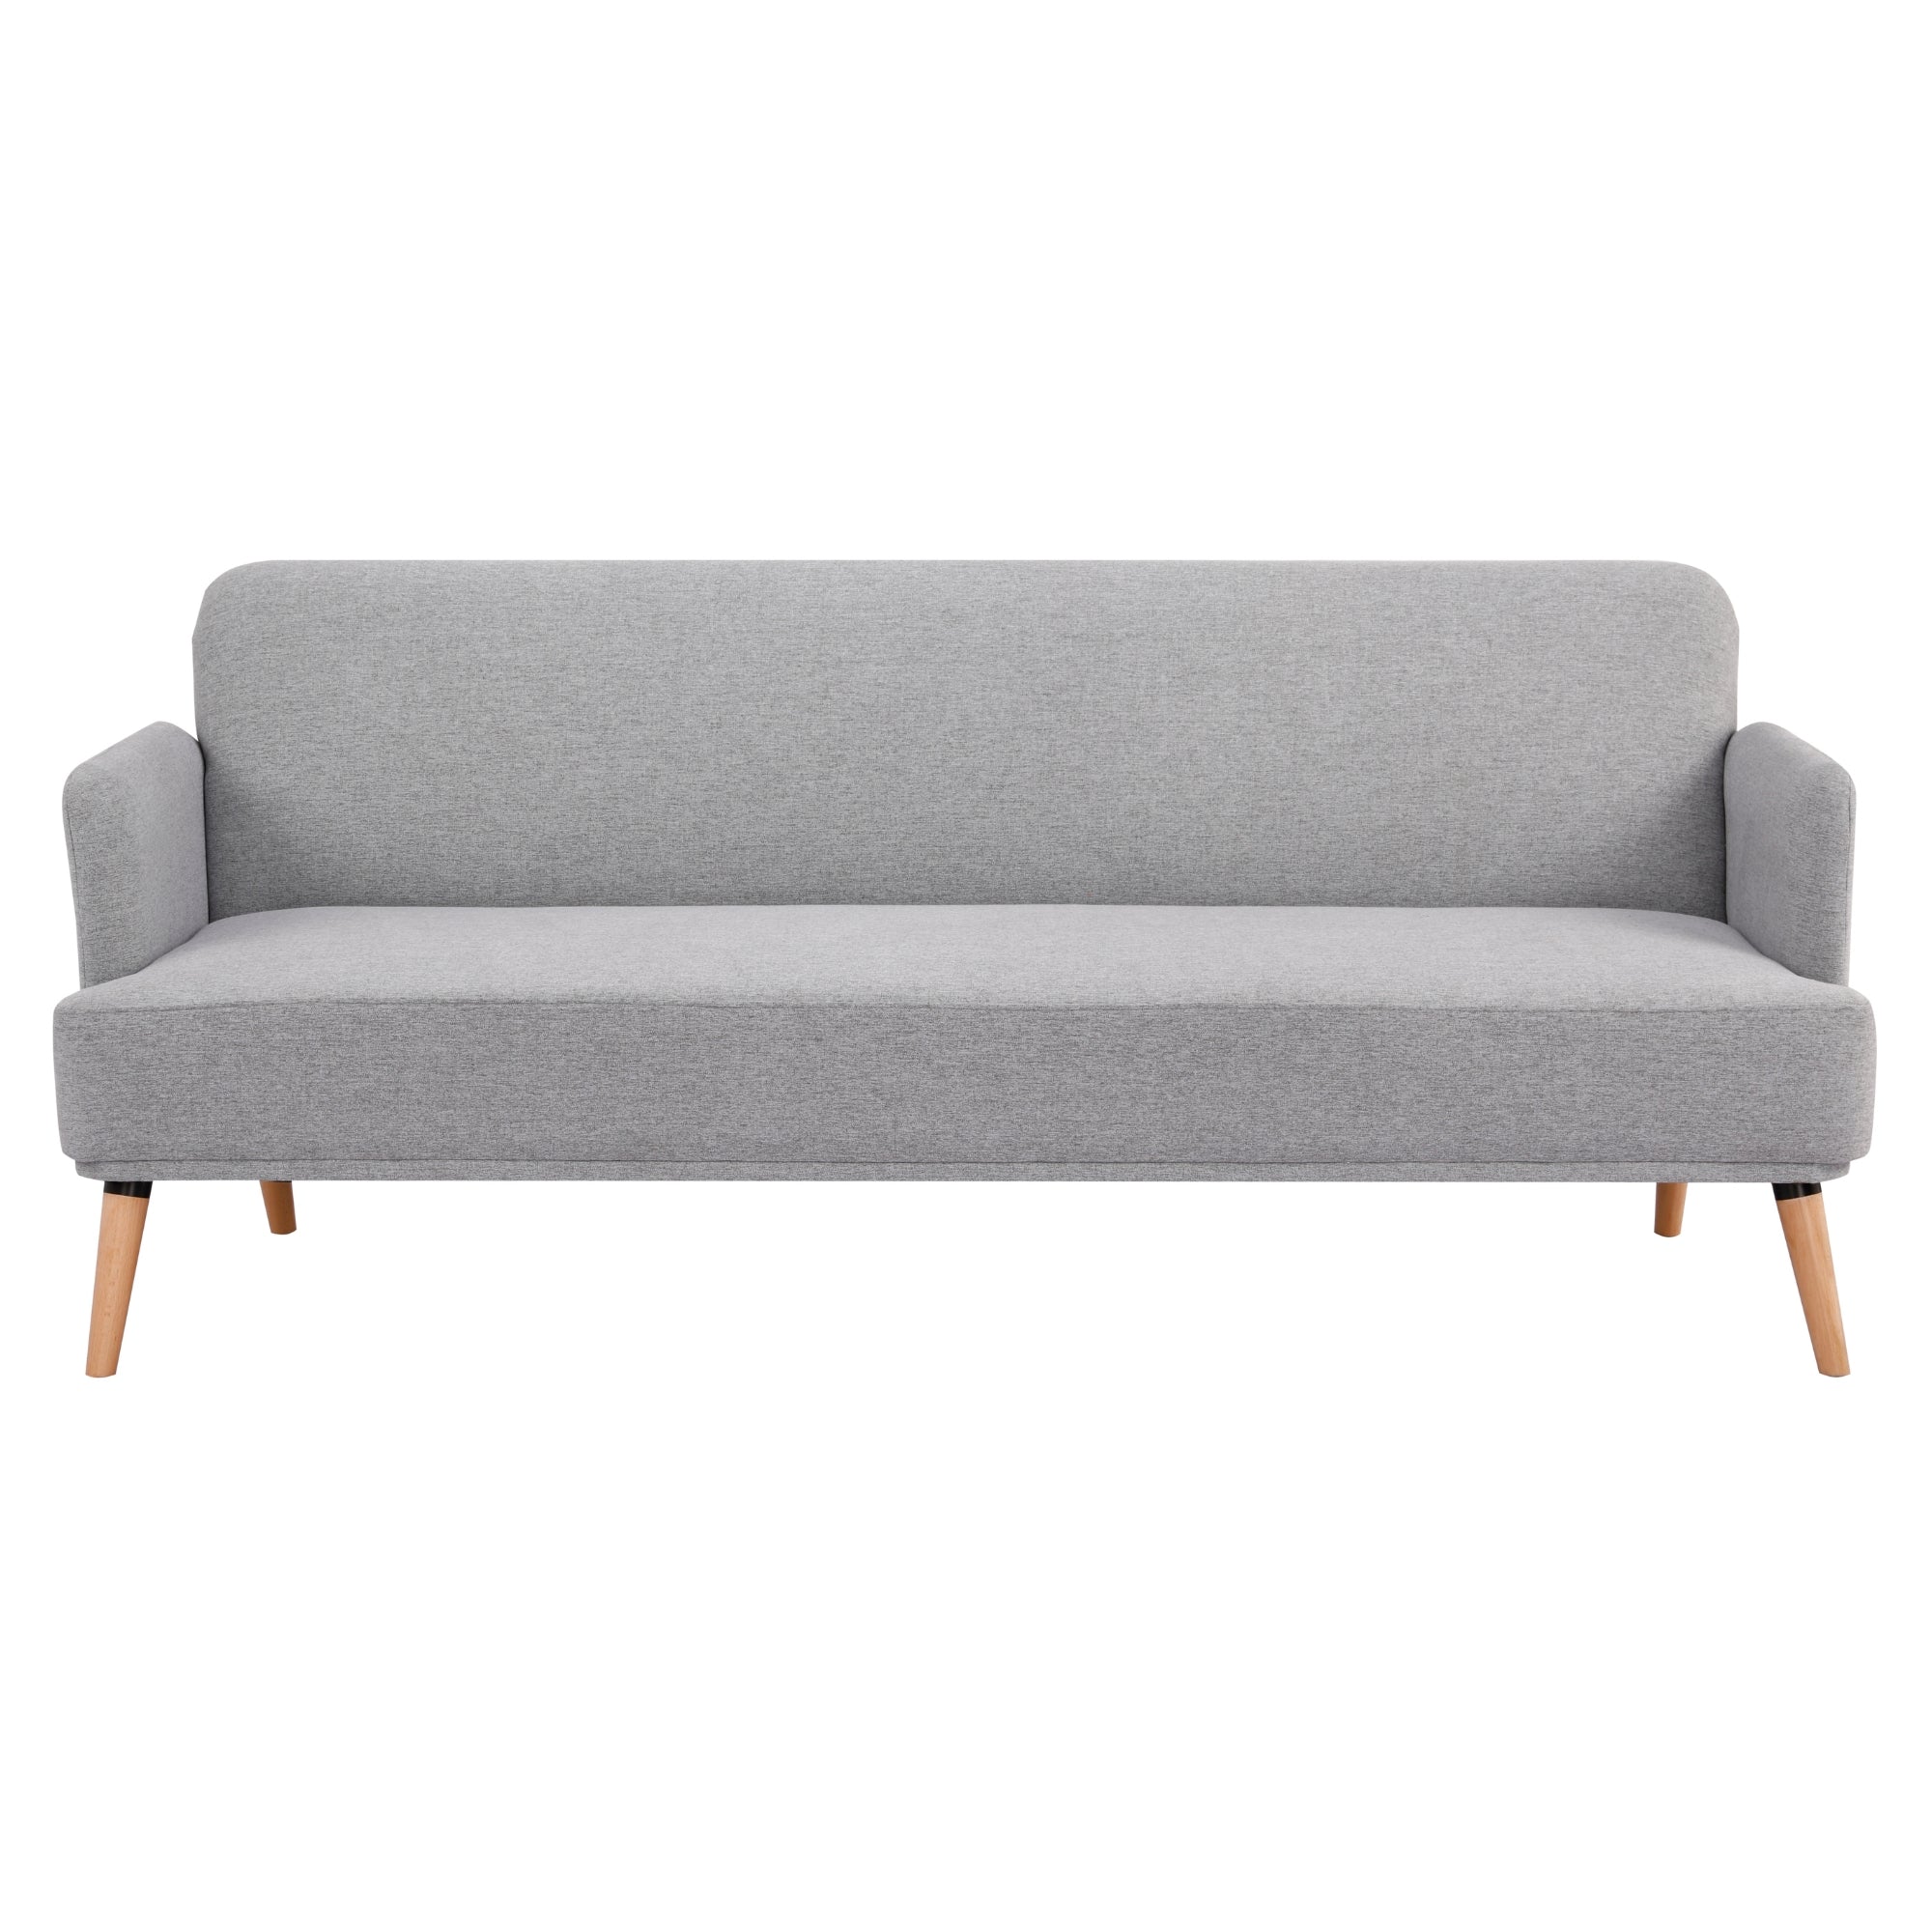 Grey 3-Seater Sofa Bed, Foam Cushioned, Polyester Upholstery